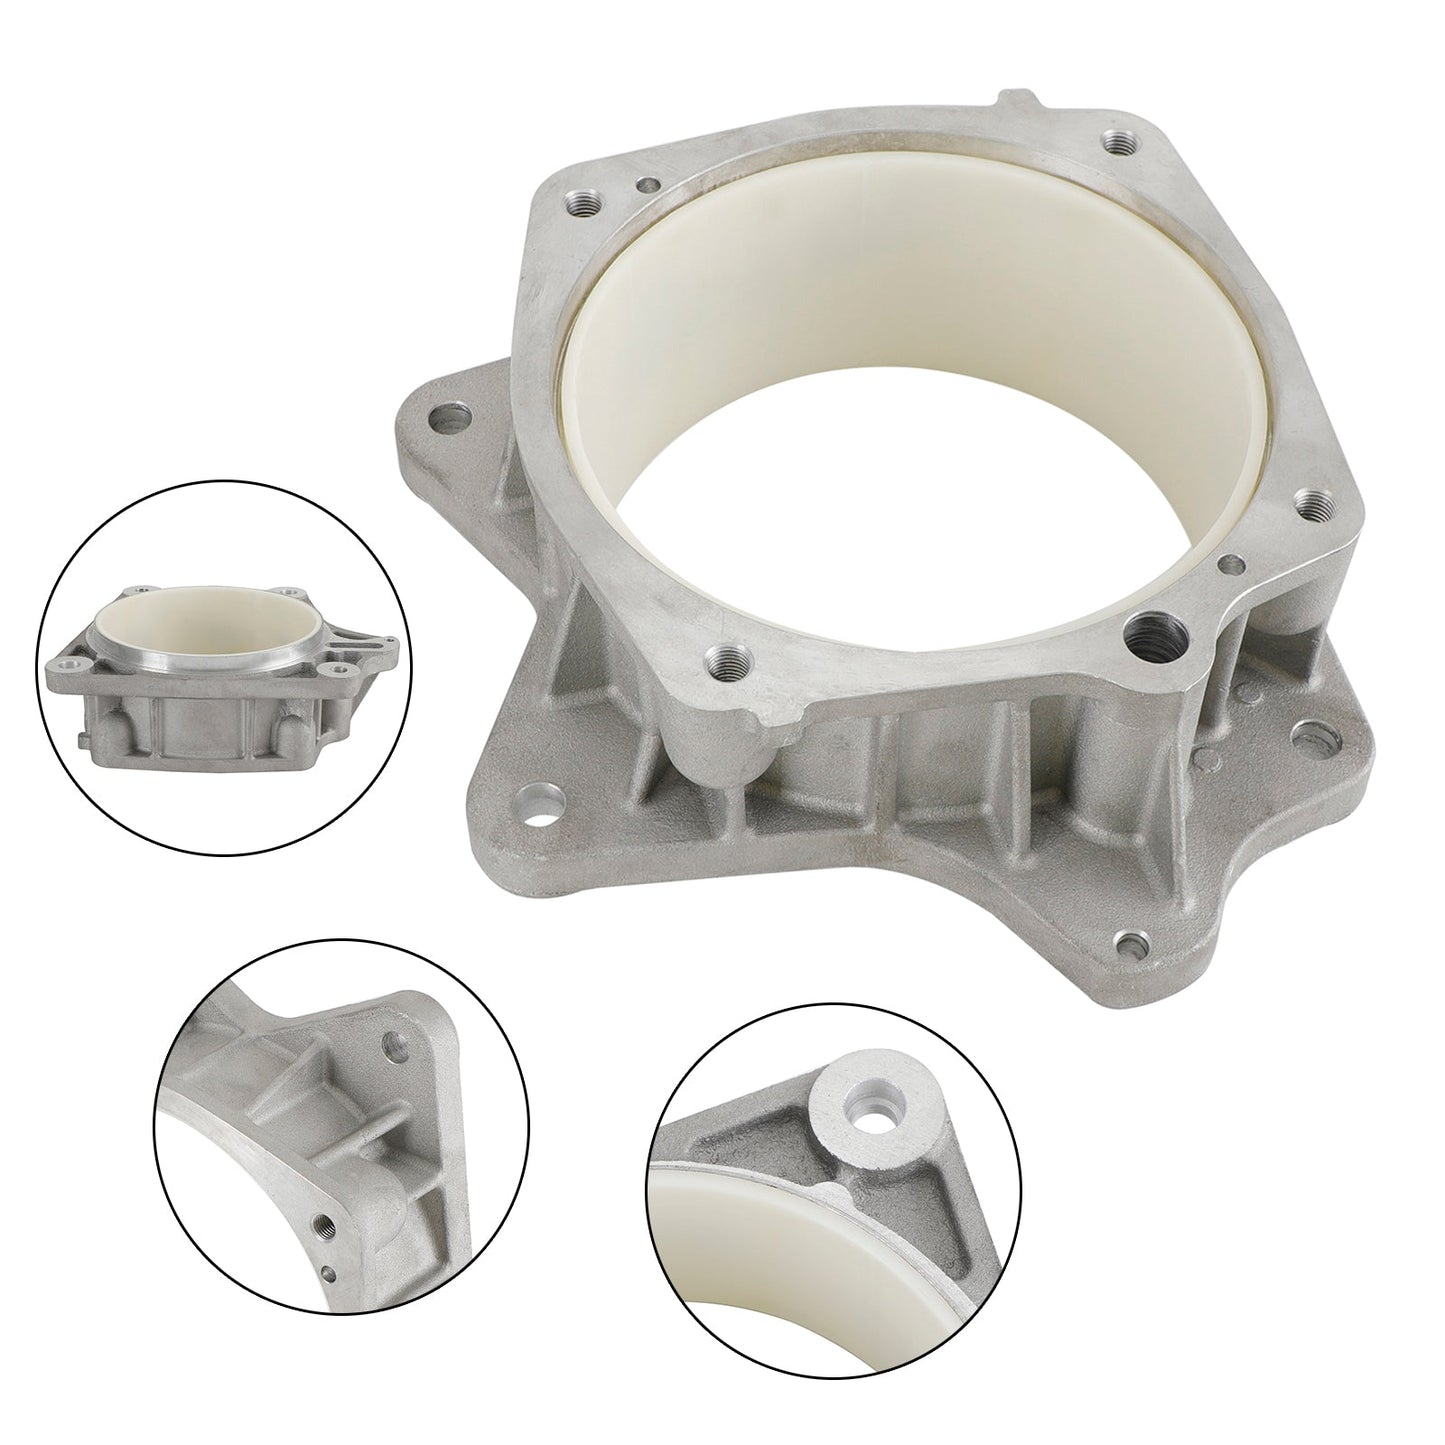 WEAR RING IMPELLER PUMP HOUSING fit for YAMAHA GP GPR 1200 1300 1200R 1300R